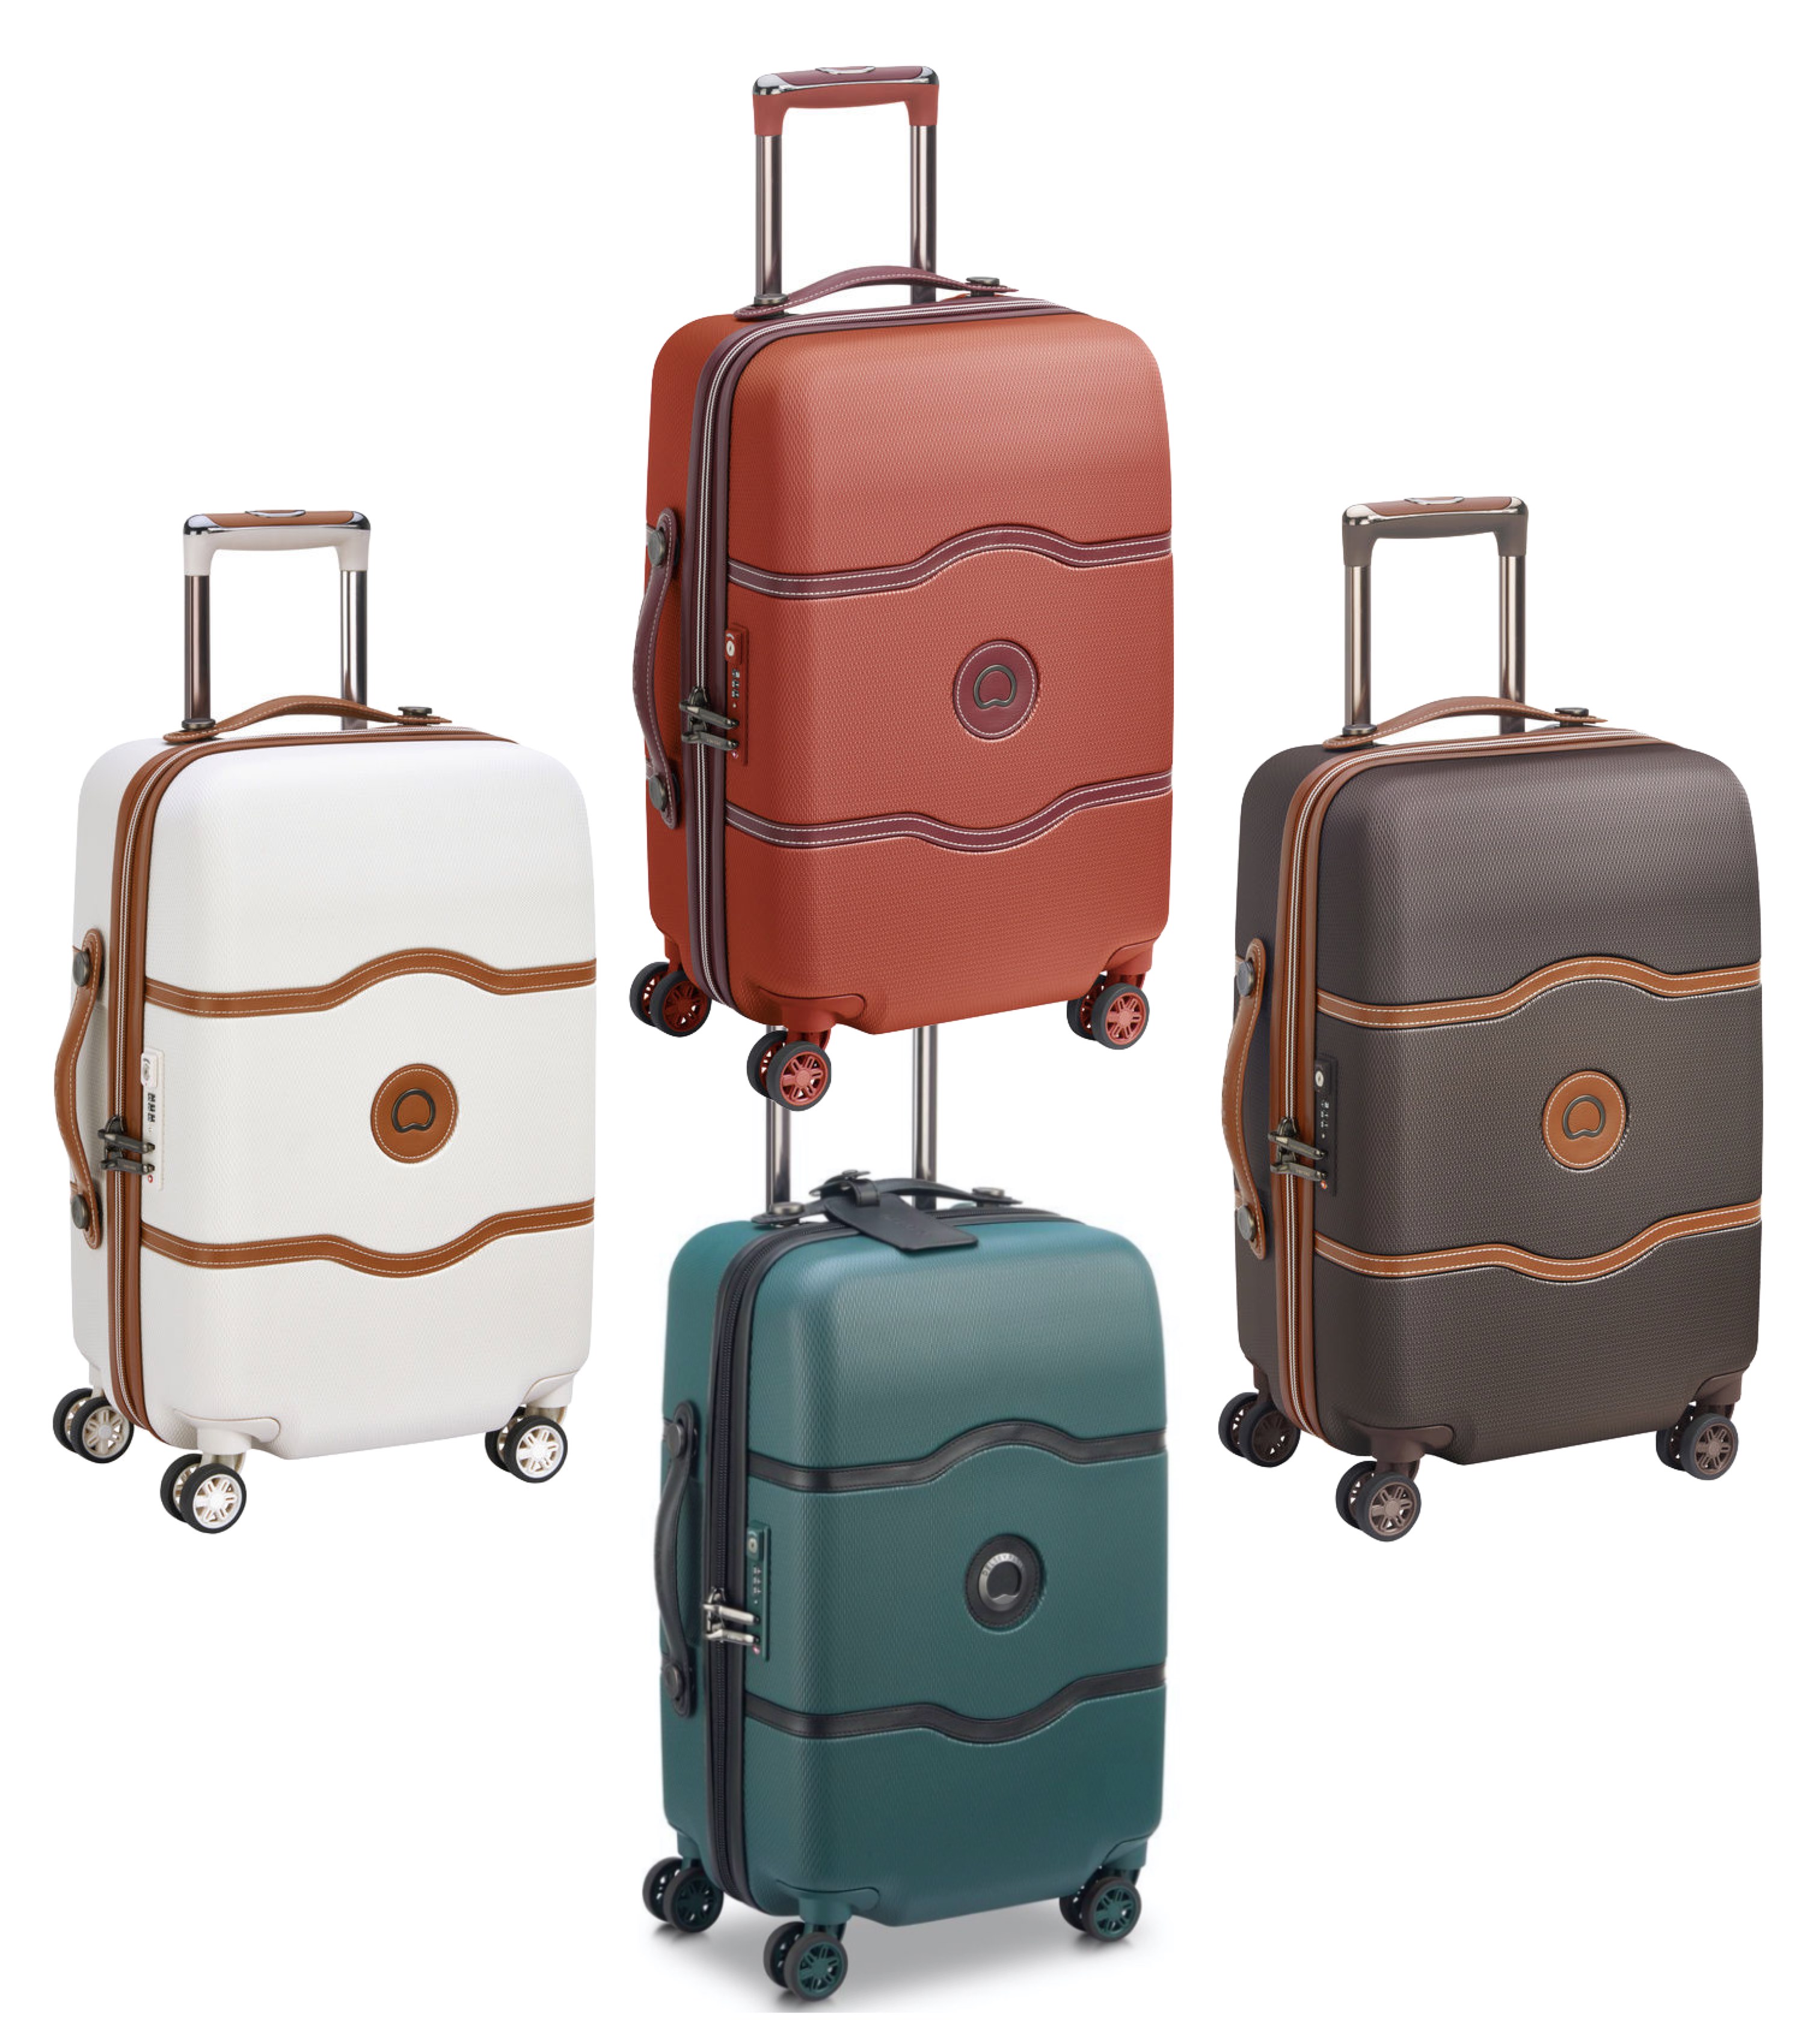 Delsey Chatelet Air - 55cm 4-Wheel Cabin Carry On Bag Luggage by Delsey